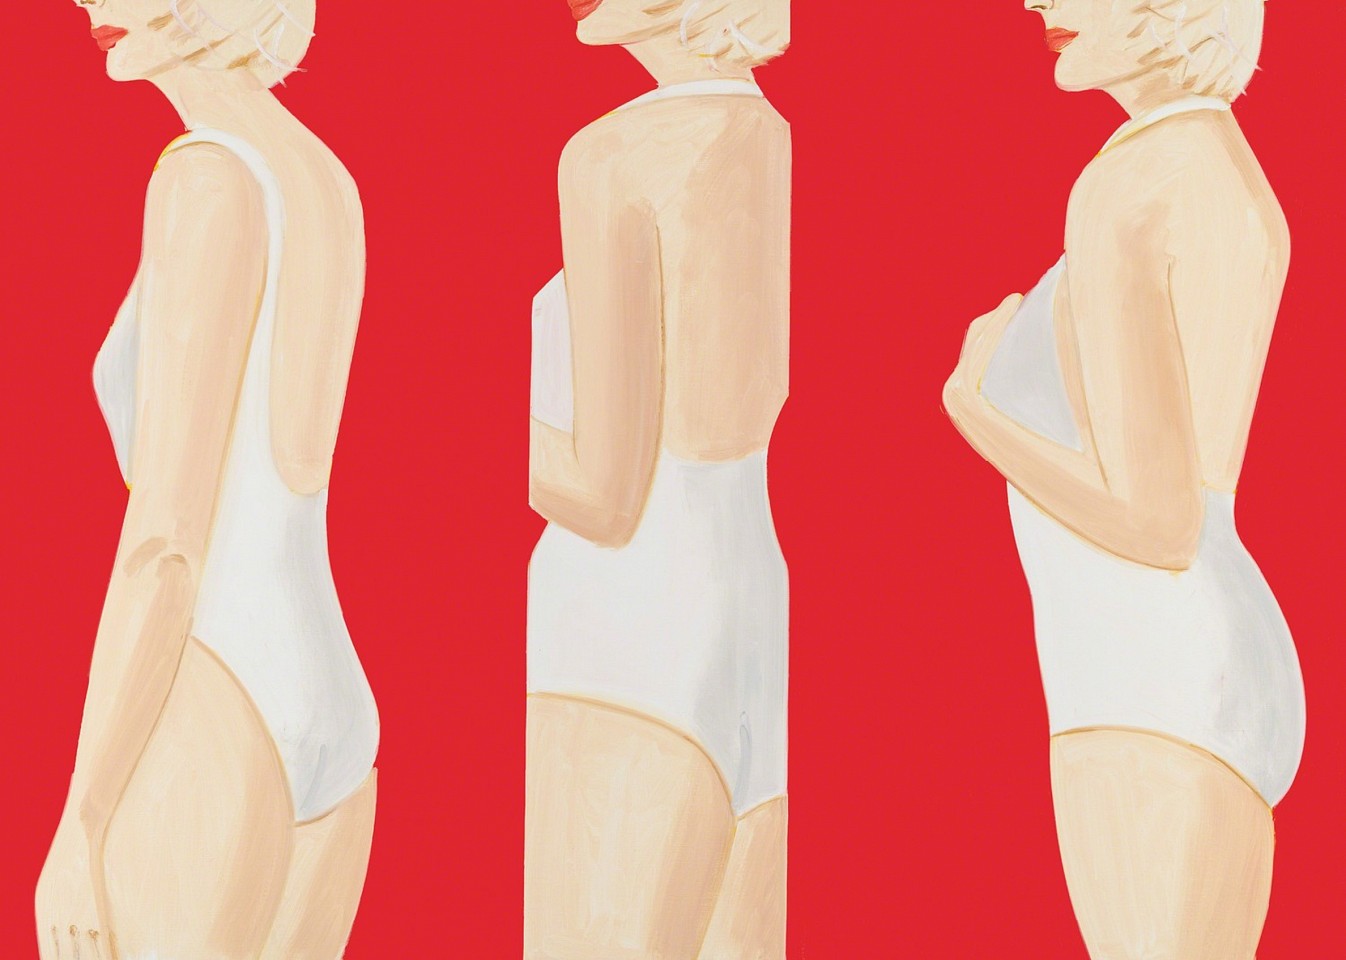 Alex Katz, Coca Cola Girls #5; edition 8/60, 2019
20-color silkscreen on Saunders Waterford High White HP 425 gsm fine art paper, 40 x 56 inches (paper)
KATZ00095